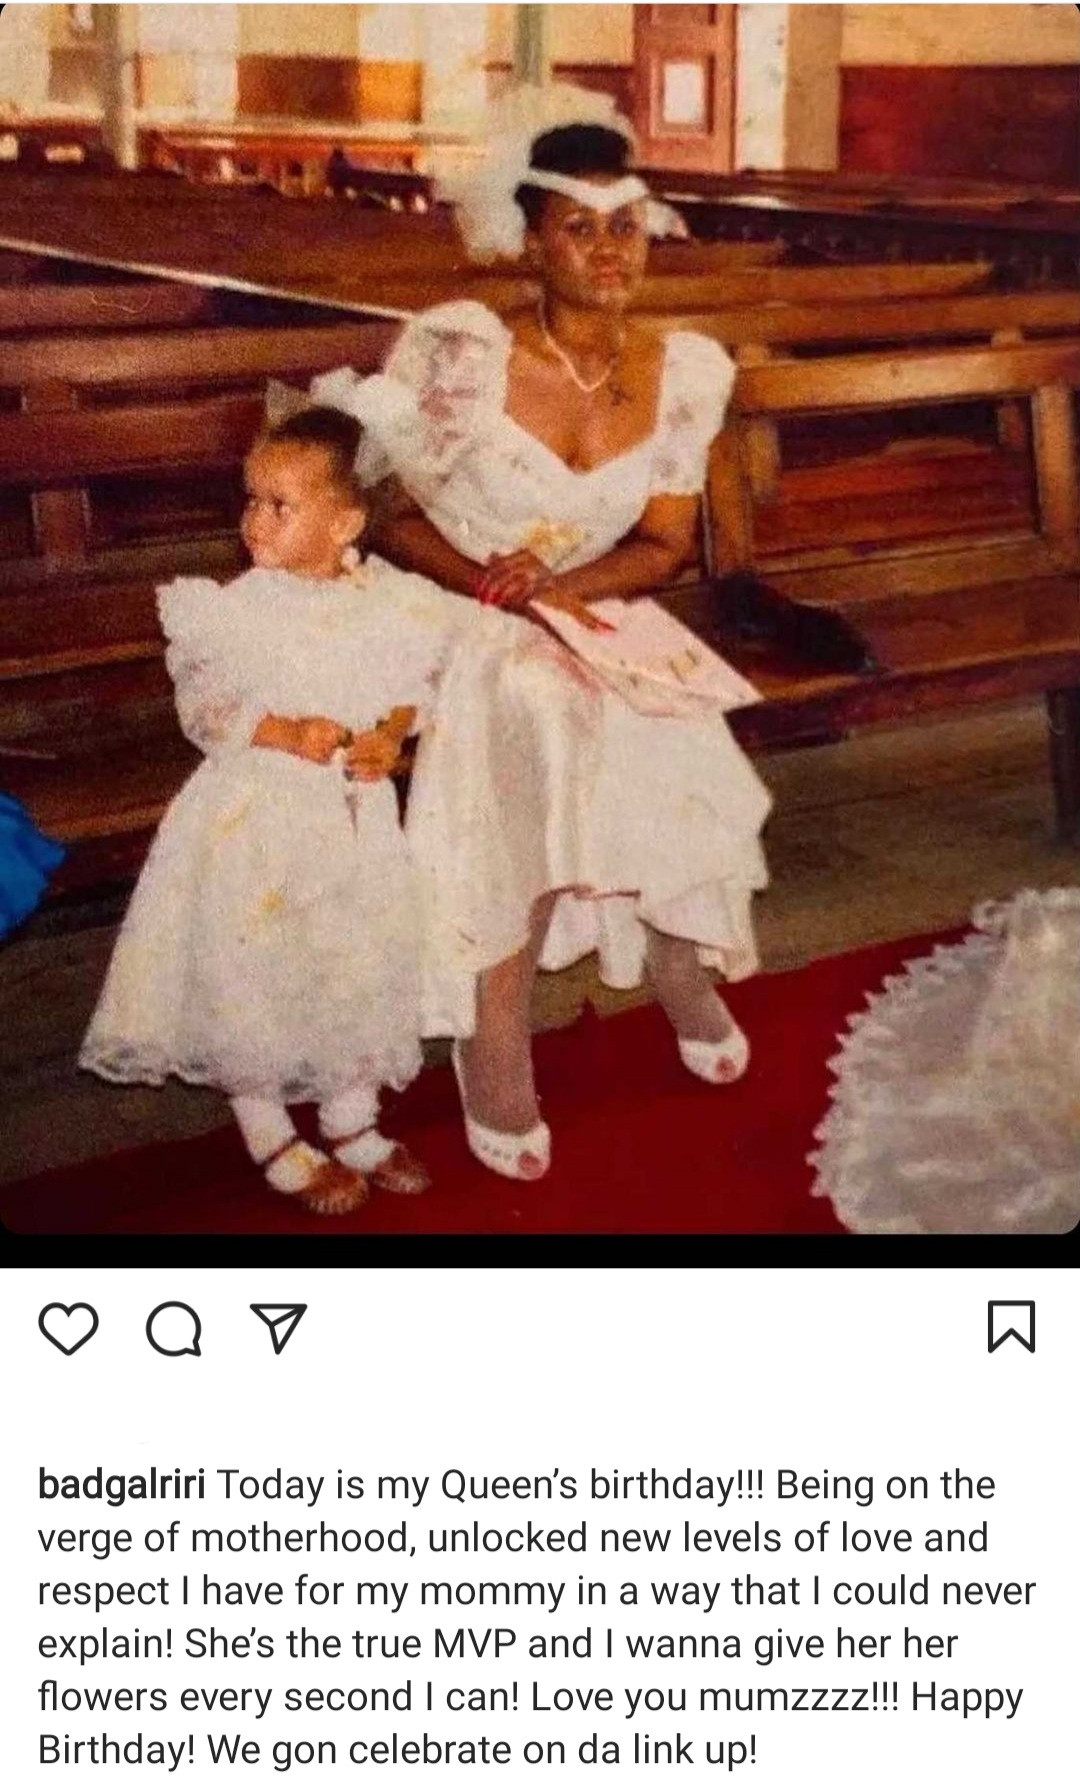 Rihanna celebrates her mother's birthday with throwback photo says "motherhood unlocked new levels of love and respect"